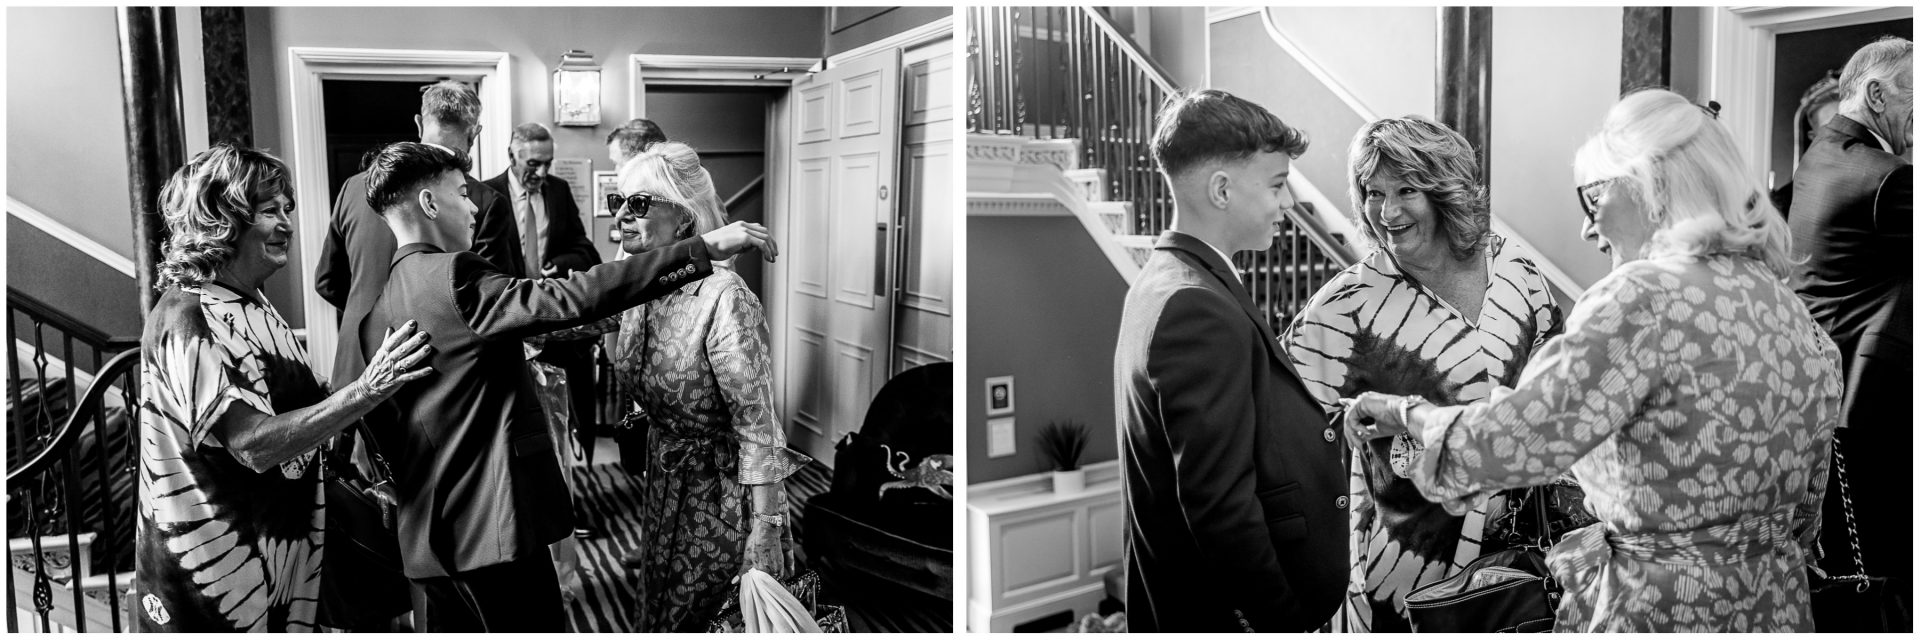 Black and white photographs of guests arriving for the marriage ceremony